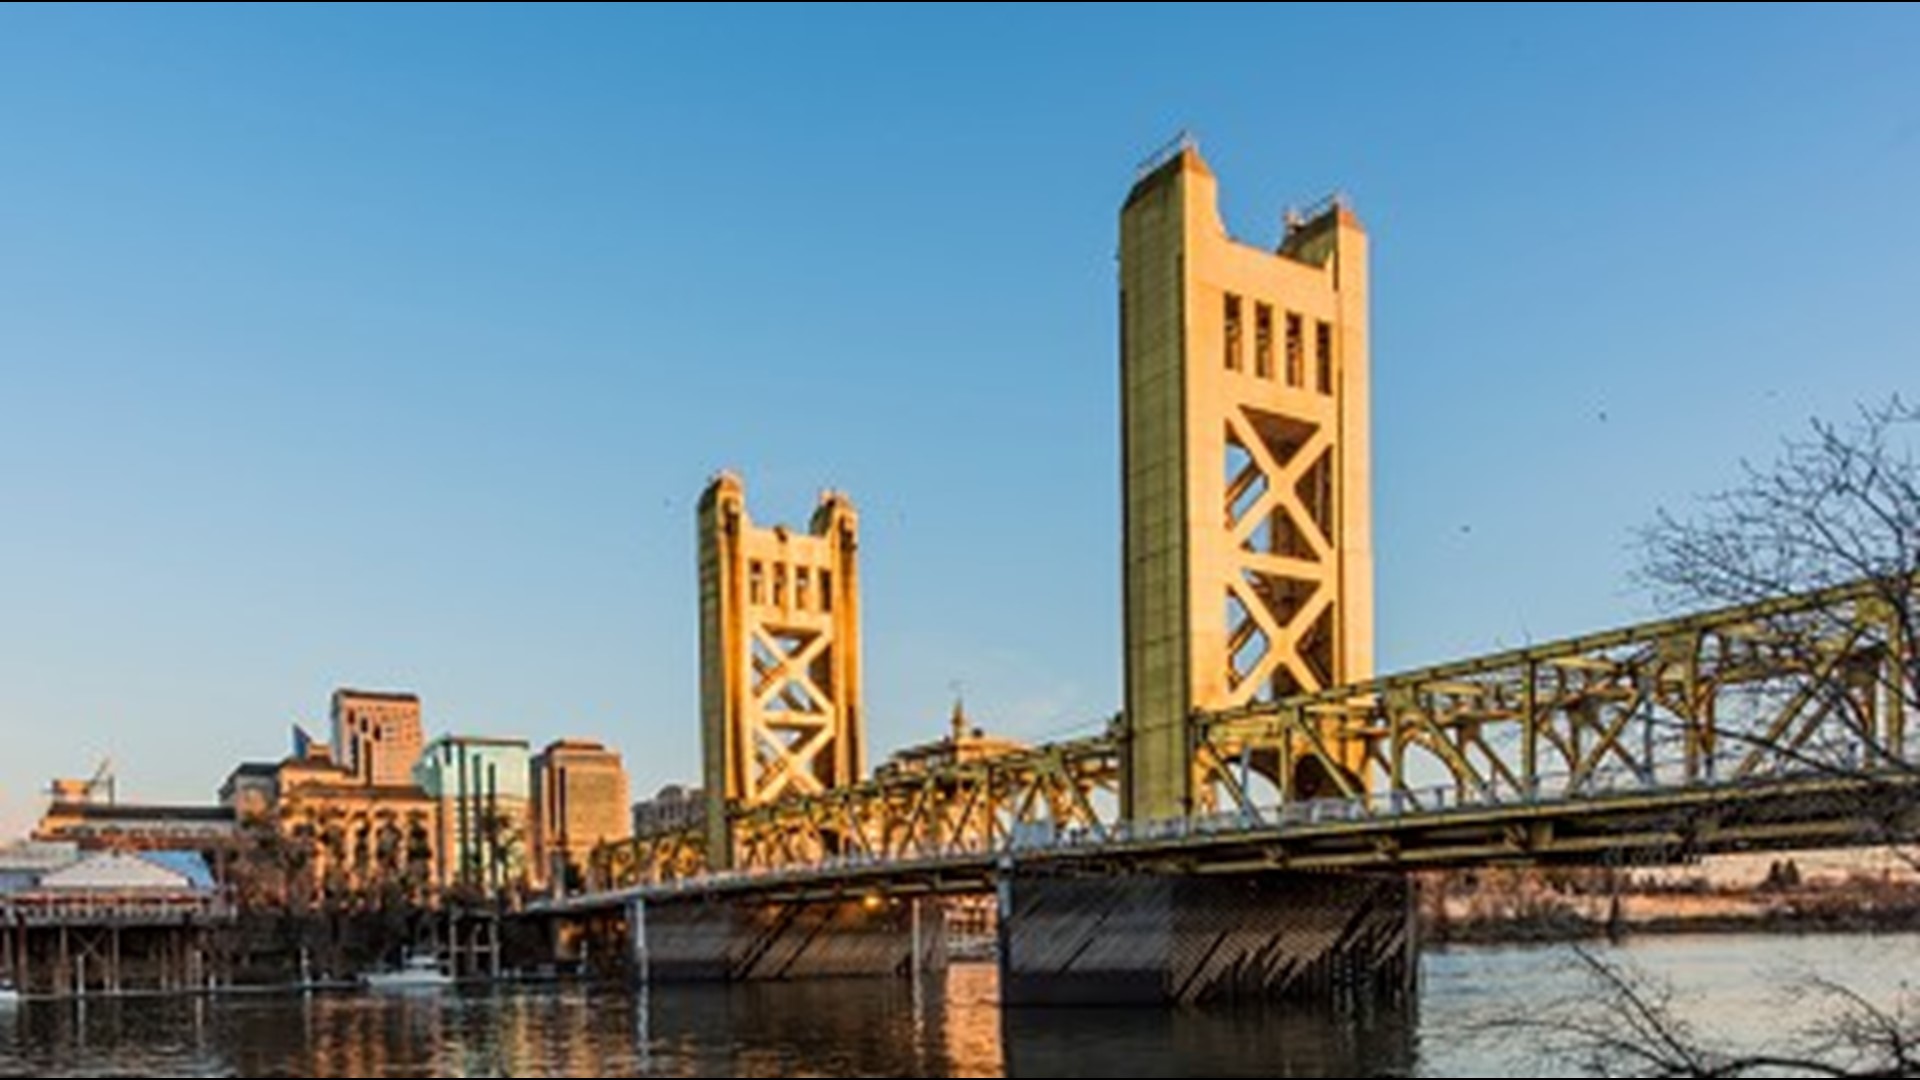 The Tower Bridge Dinner in Sacramento is getting a new look this year because of the coronavirus pandemic. The event is now "to go."